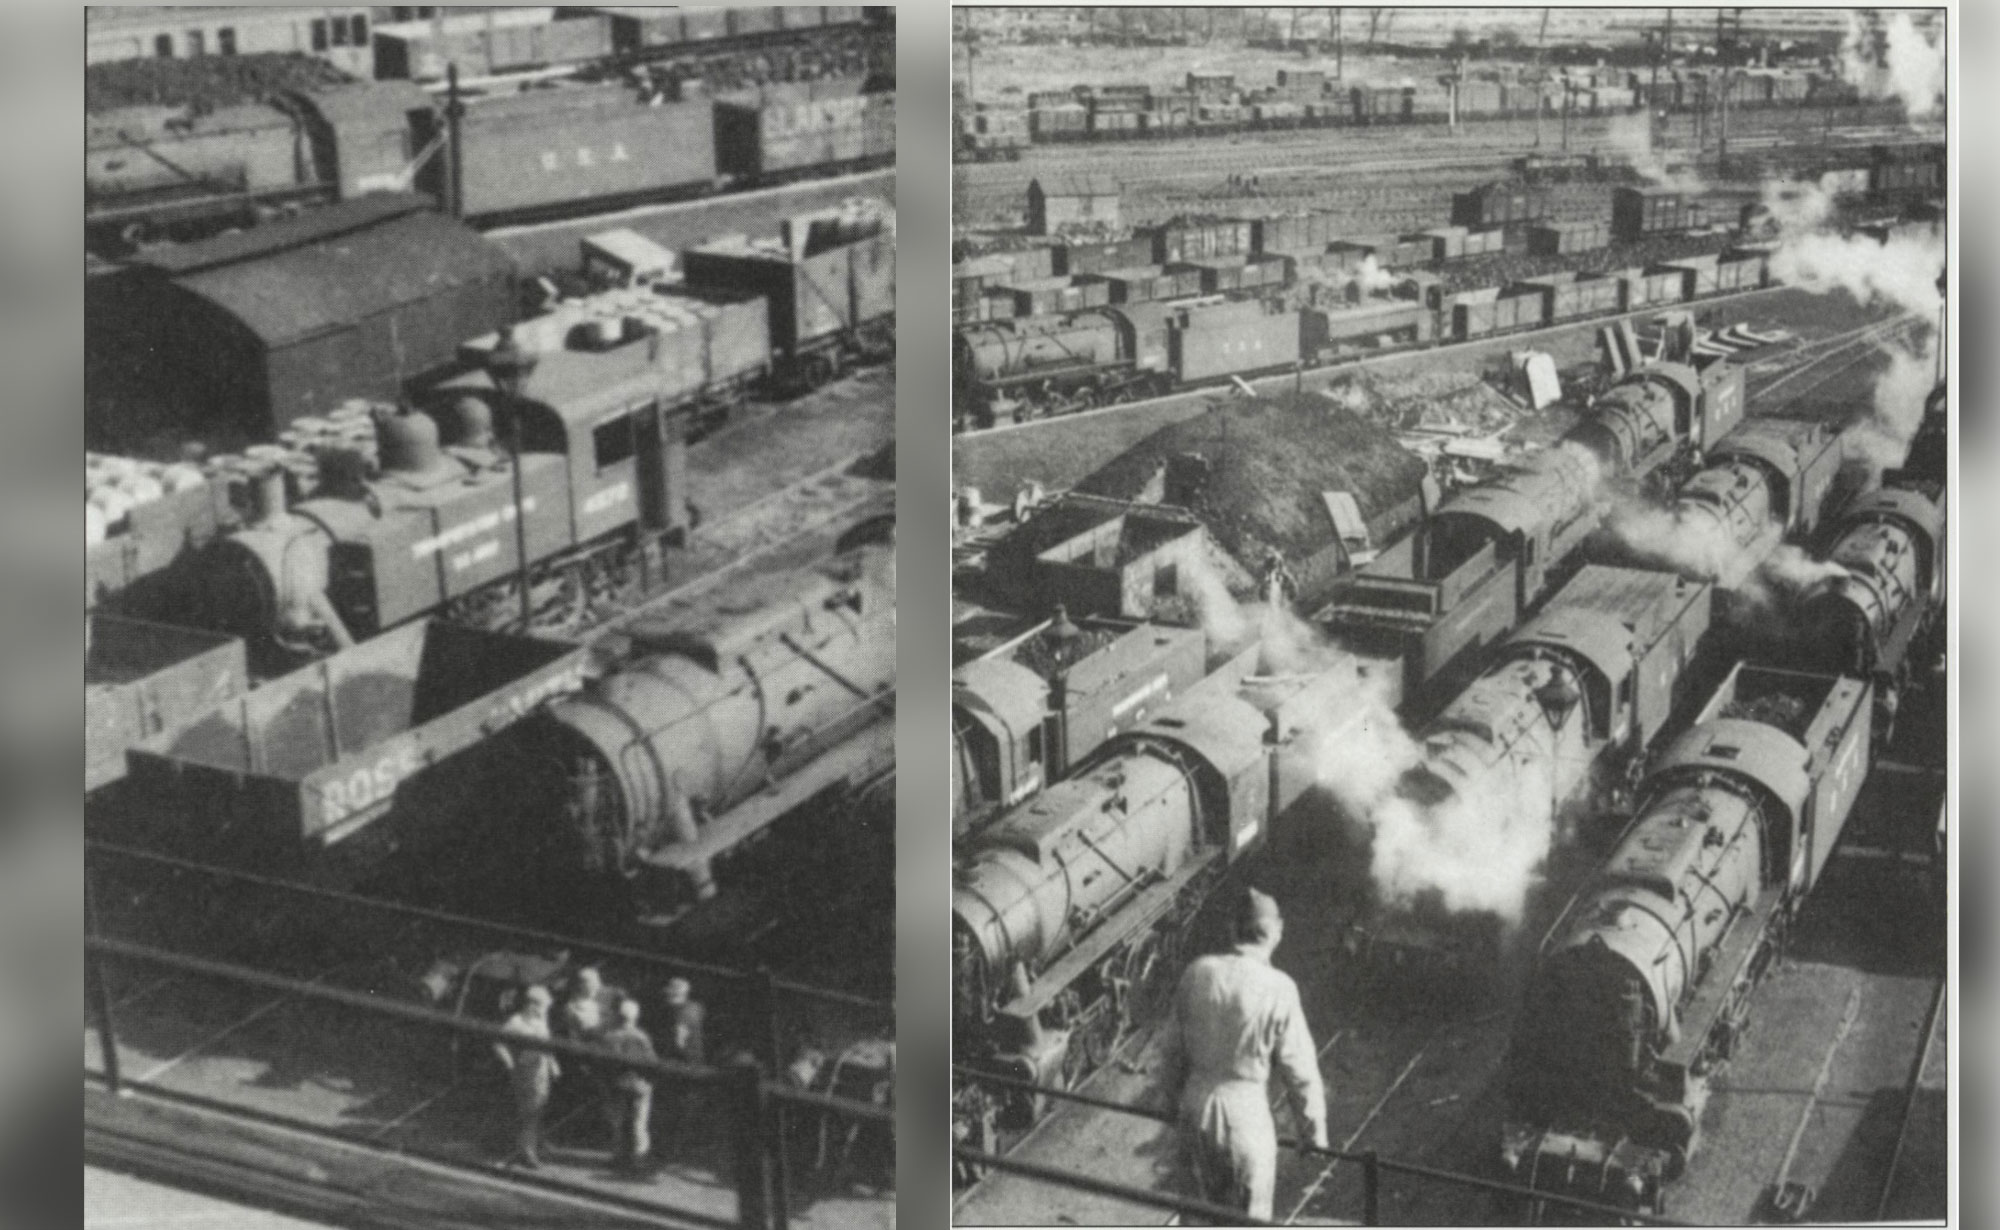 U.S. military 2-8-0 locomotive are being prepared for service at the Newport Shops in South Whales, Great Britain, prior to being shipped accross the English Channel. The engines were first road-tested on Britain's Great Western Tailway by ROB and GWR locomotive crews.